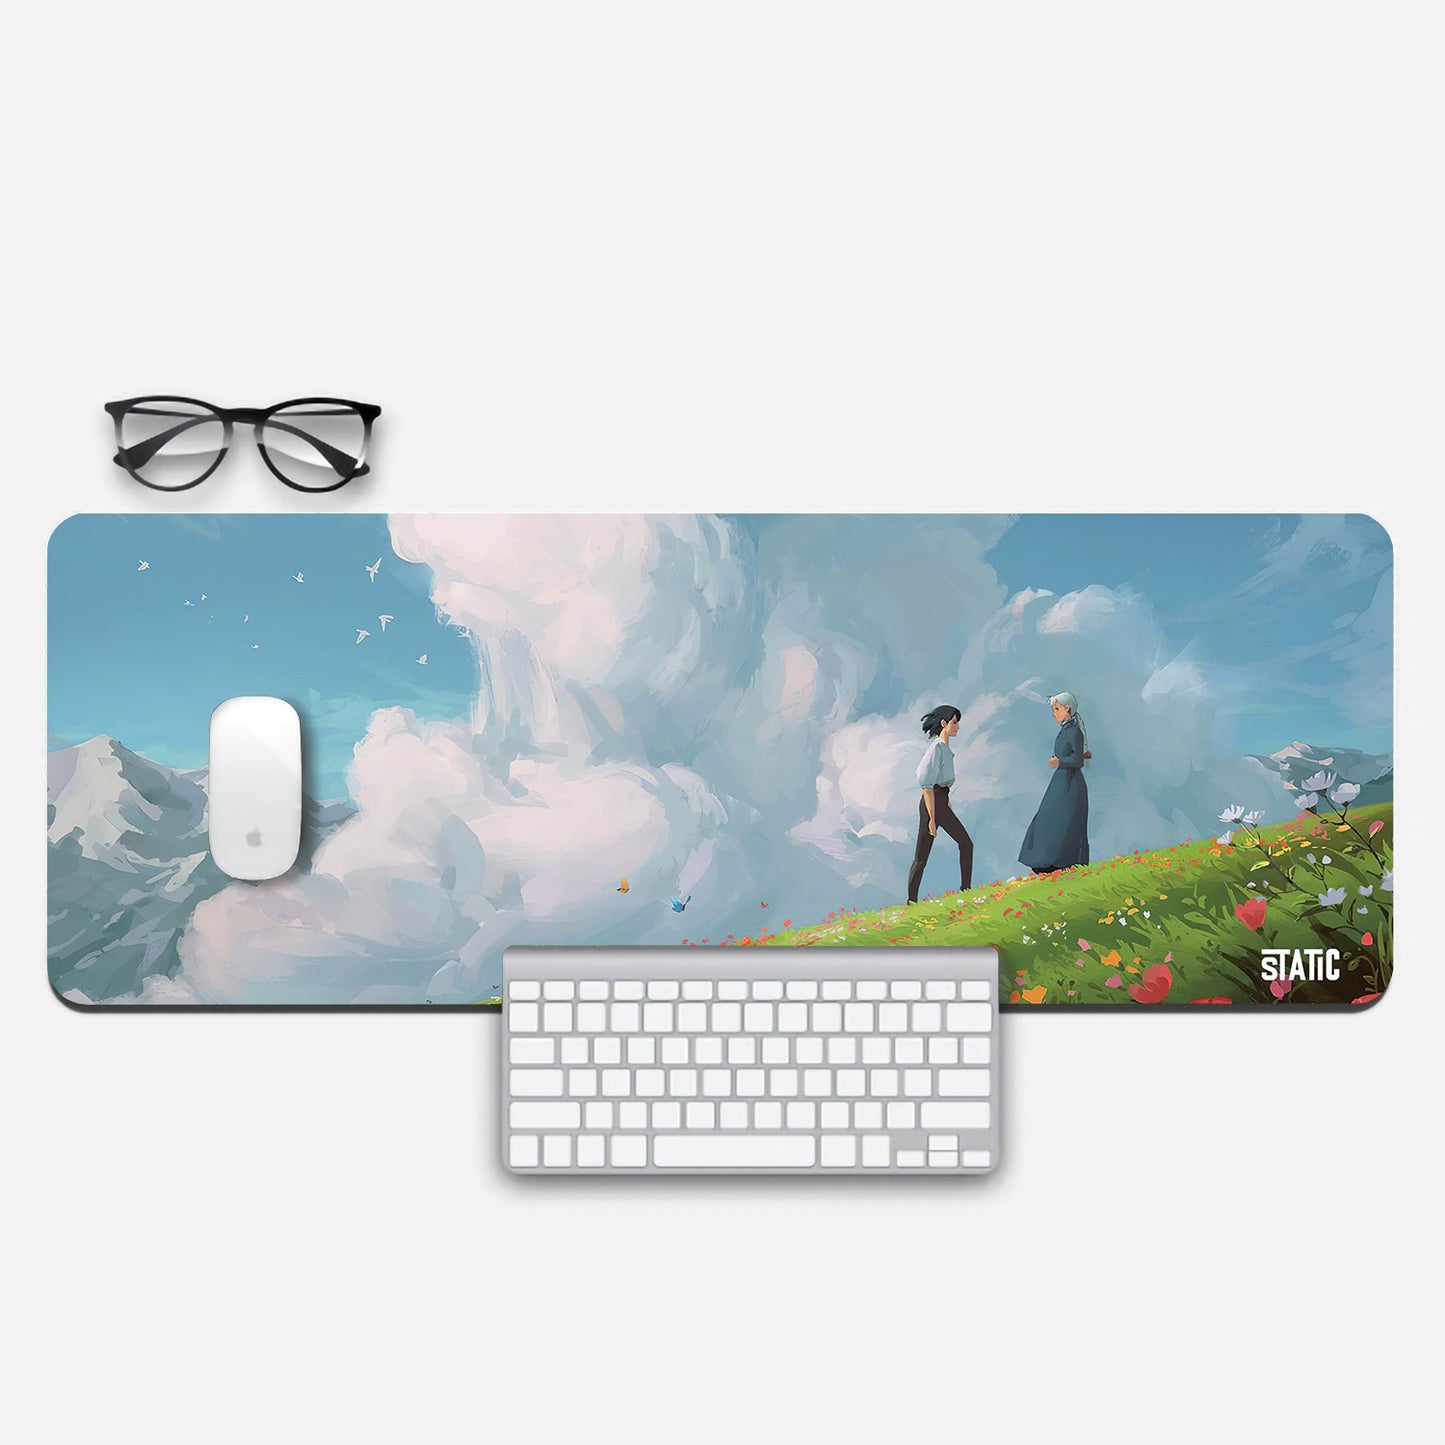 Step into the enchanting world of Howl's Moving Castle with our extended gaming mouse pad! Featuring Howl and Sophie against a backdrop of serene clouds and majestic mountains, this Studio Ghibli-inspired design elevates your gaming setup to a new level of artistry. Enjoy precise mouse control while basking in the romance and wonder of this beloved film. Level up your gaming experience today!